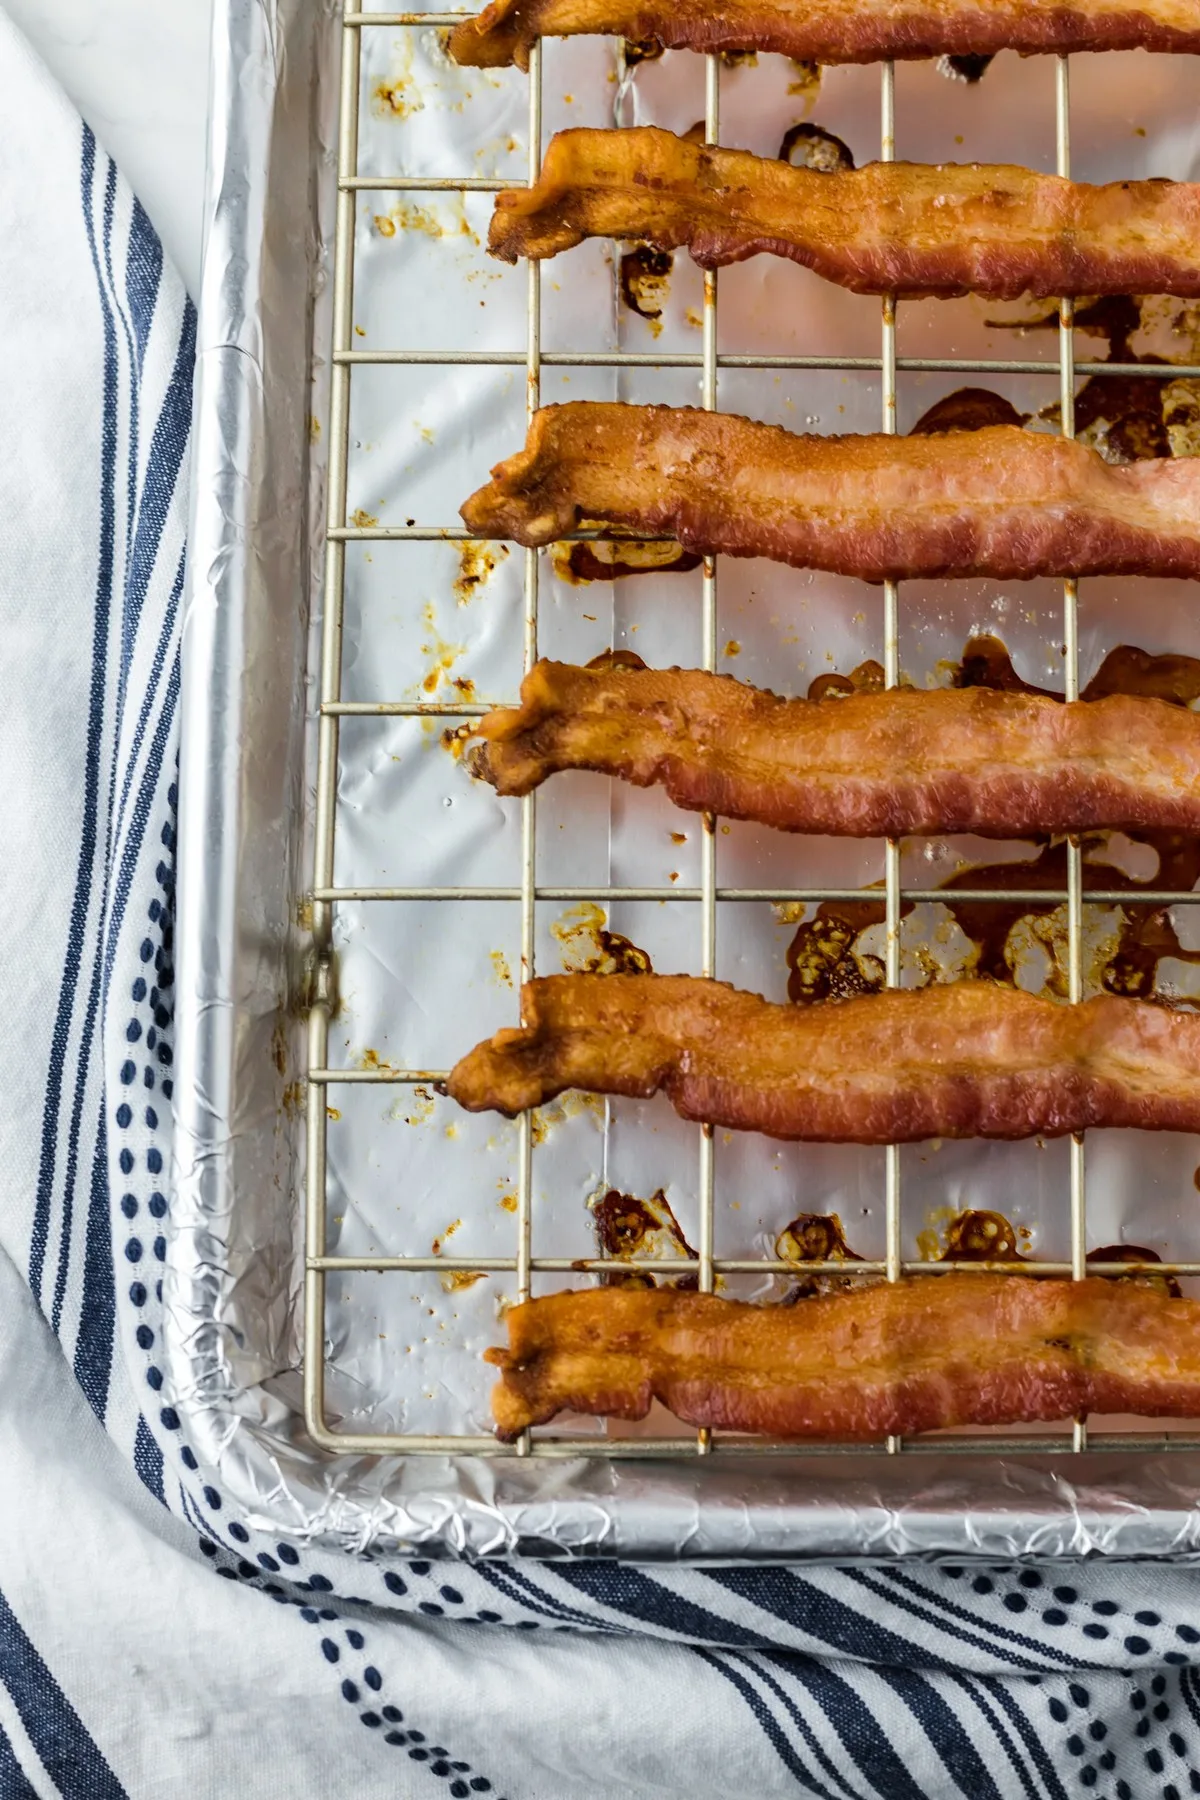 Easy Oven Cooked Bacon Recipe